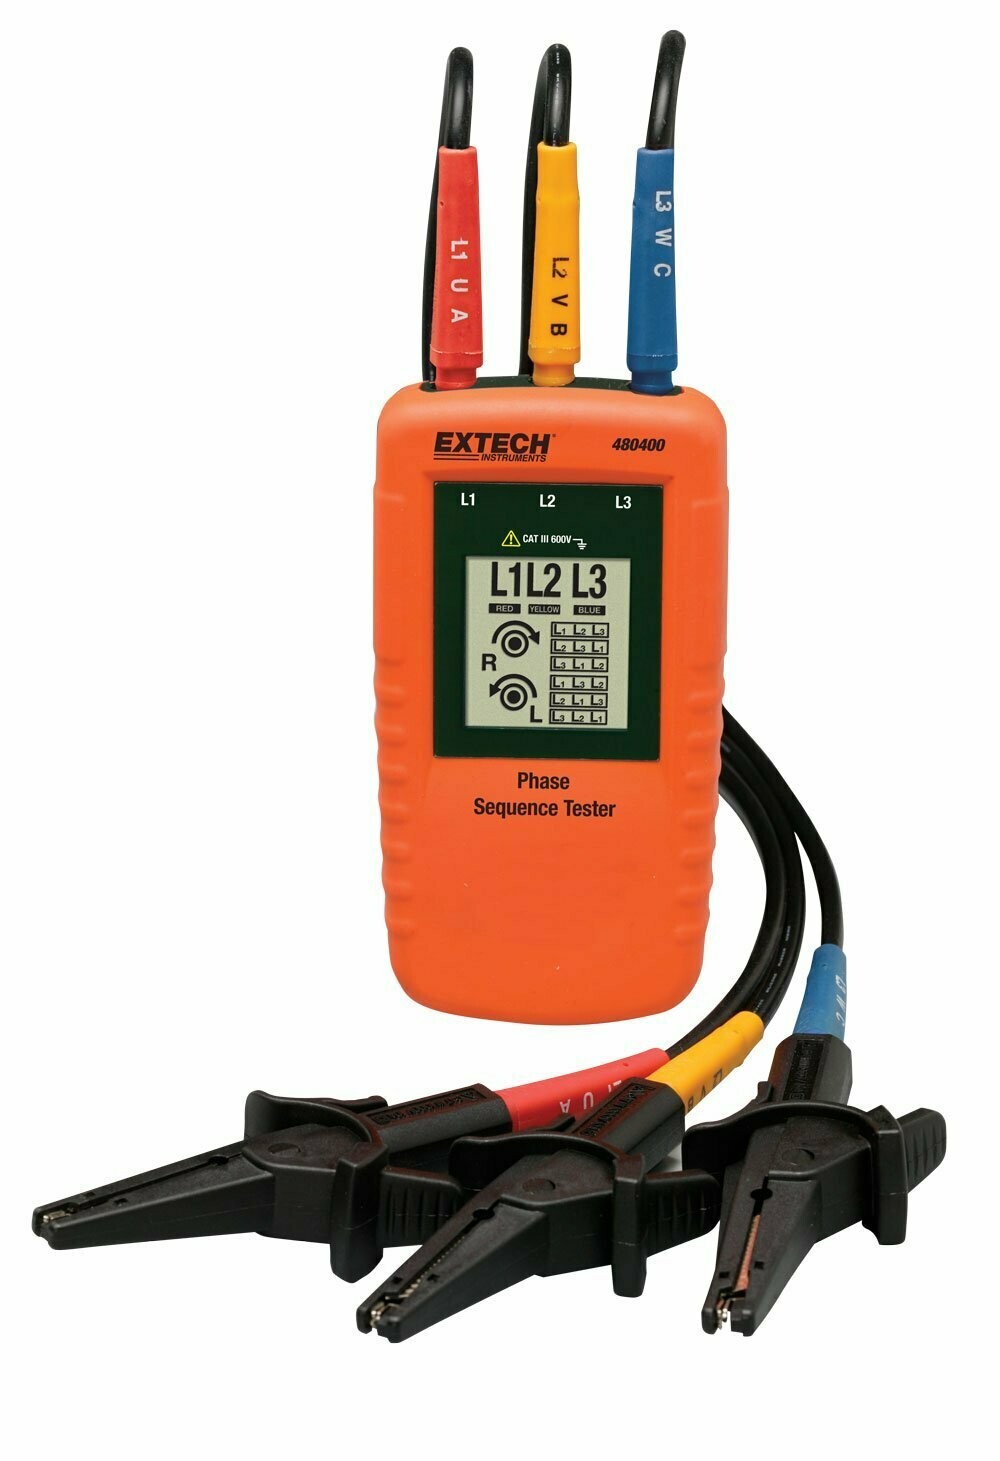 Extech 480400 - 3 phase Rotation Tester / Phase Sequence Tester